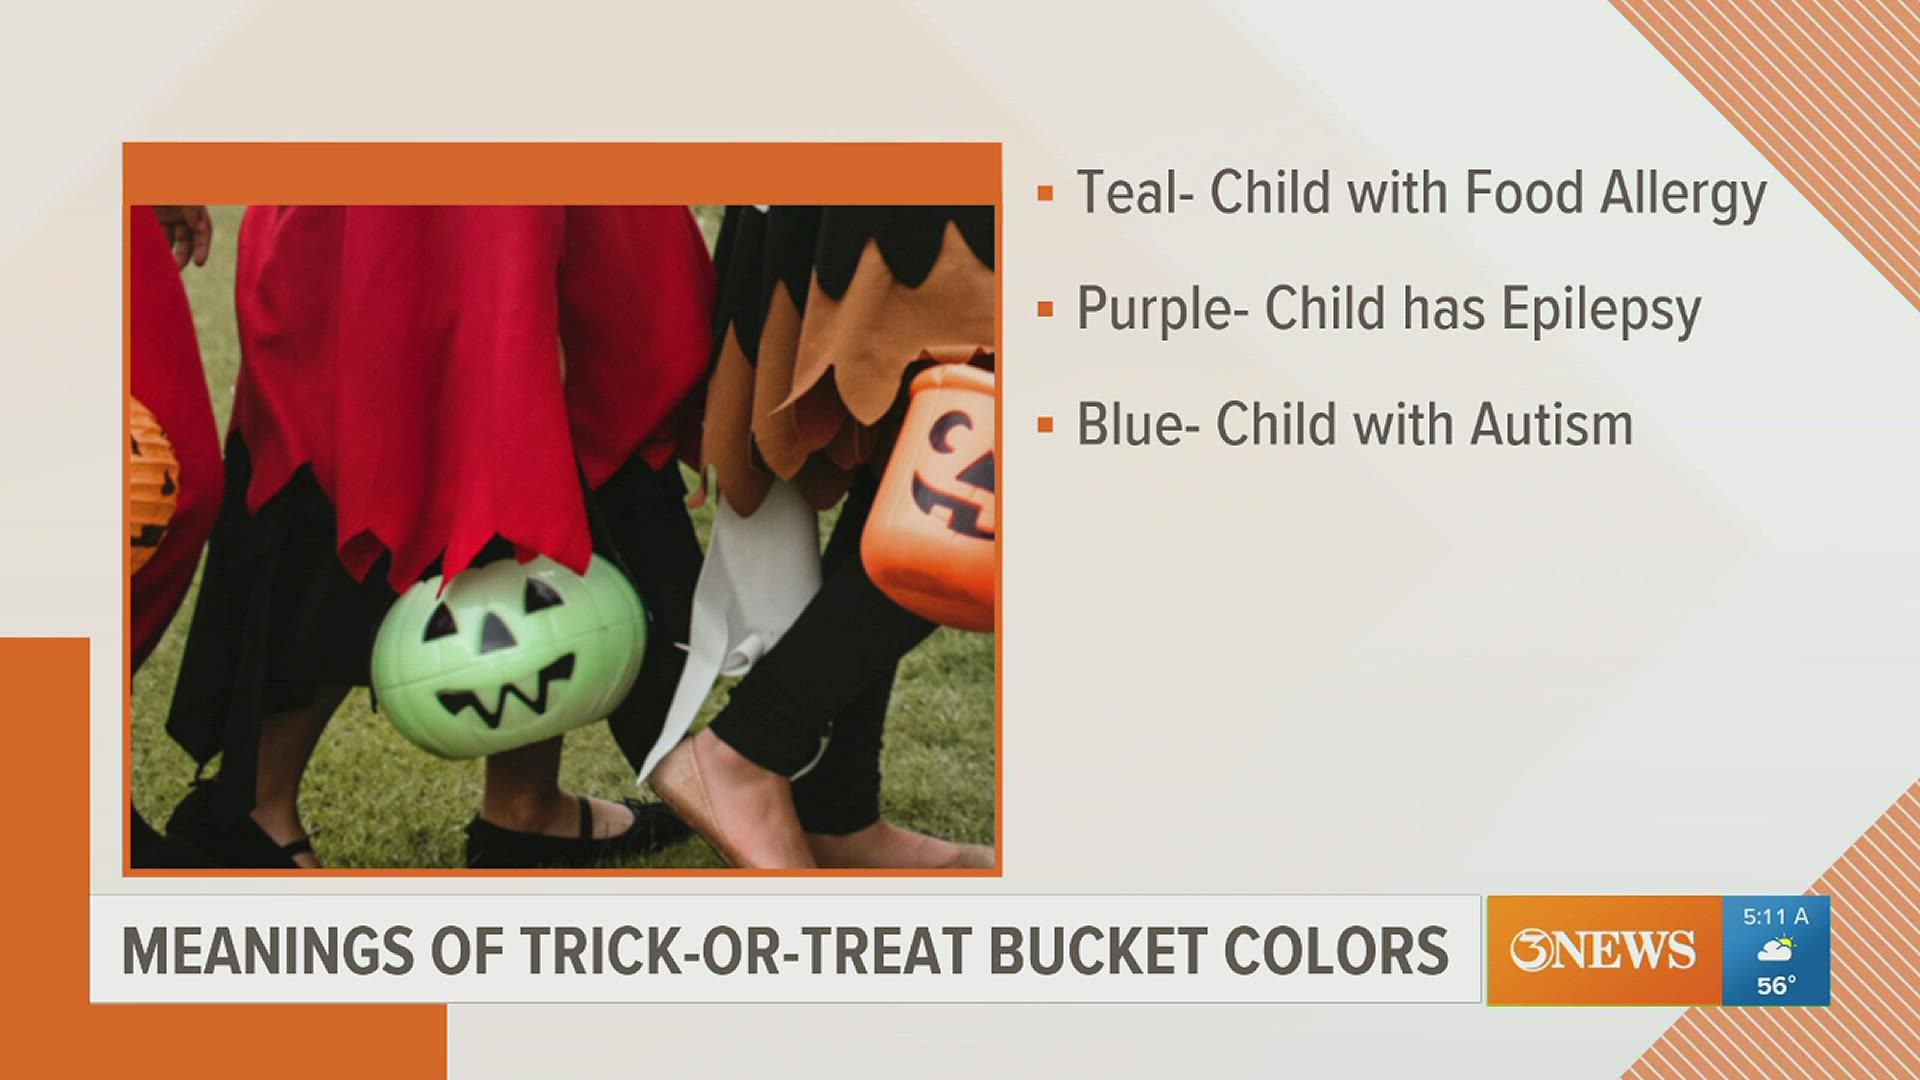 Colors of buckets and decorations have their own meanings, but do you know what they mean?